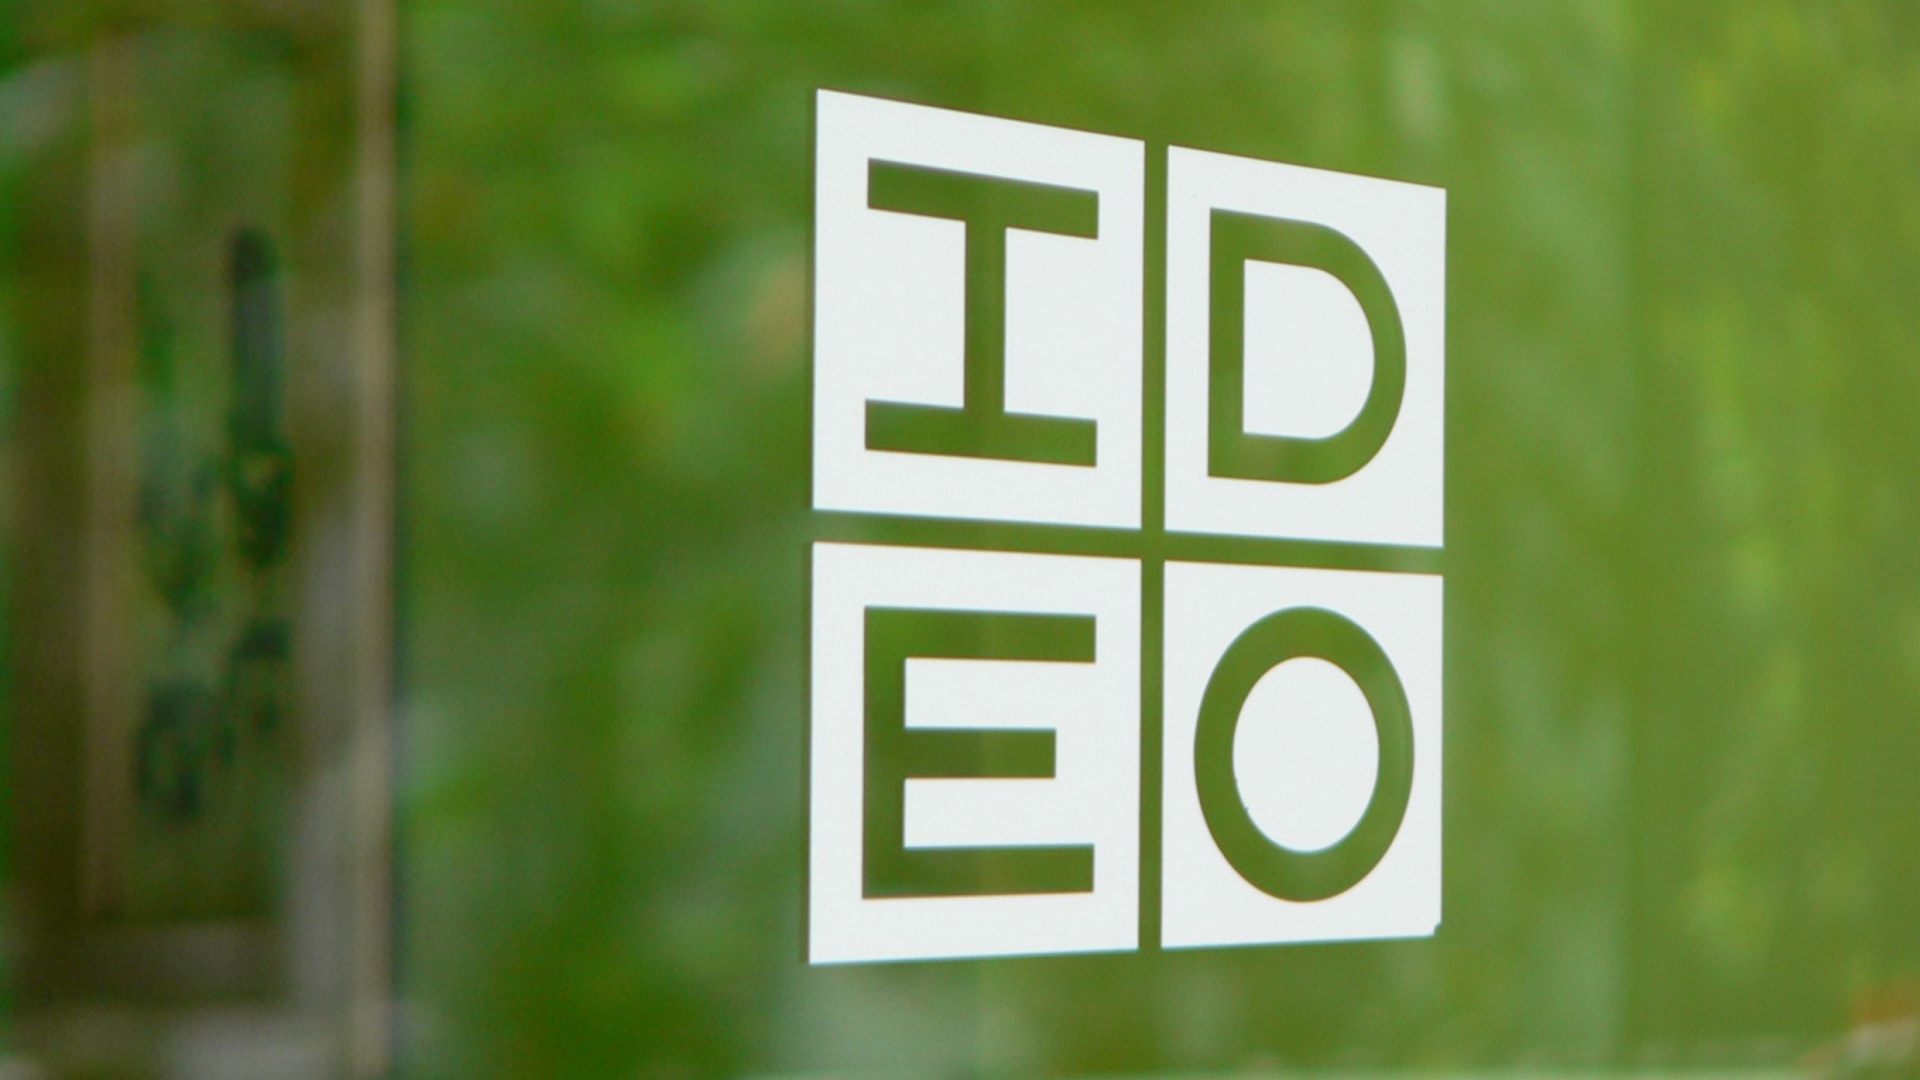 Embattled Ideo CEO Sandy Speicher is stepping down